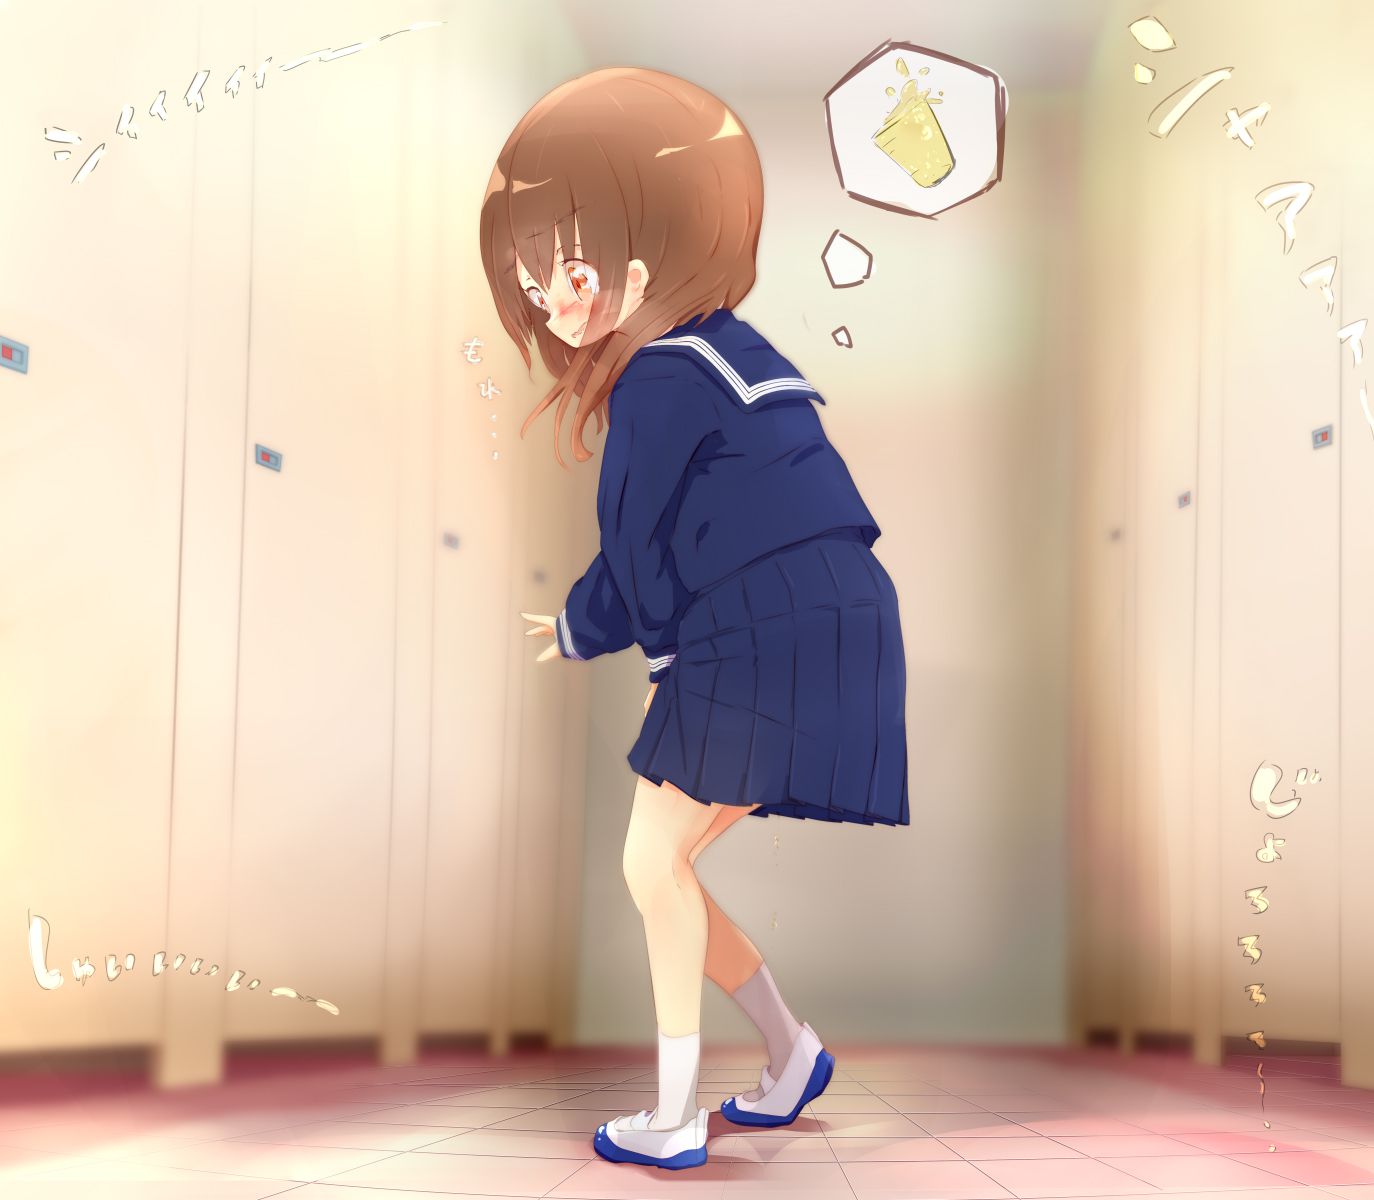 [Ojima Lori] What a good thing of the pee patience figure of lori girl who is desperately putting up with the urine intention while becoming an inner crotch and Mojimoji ... 25